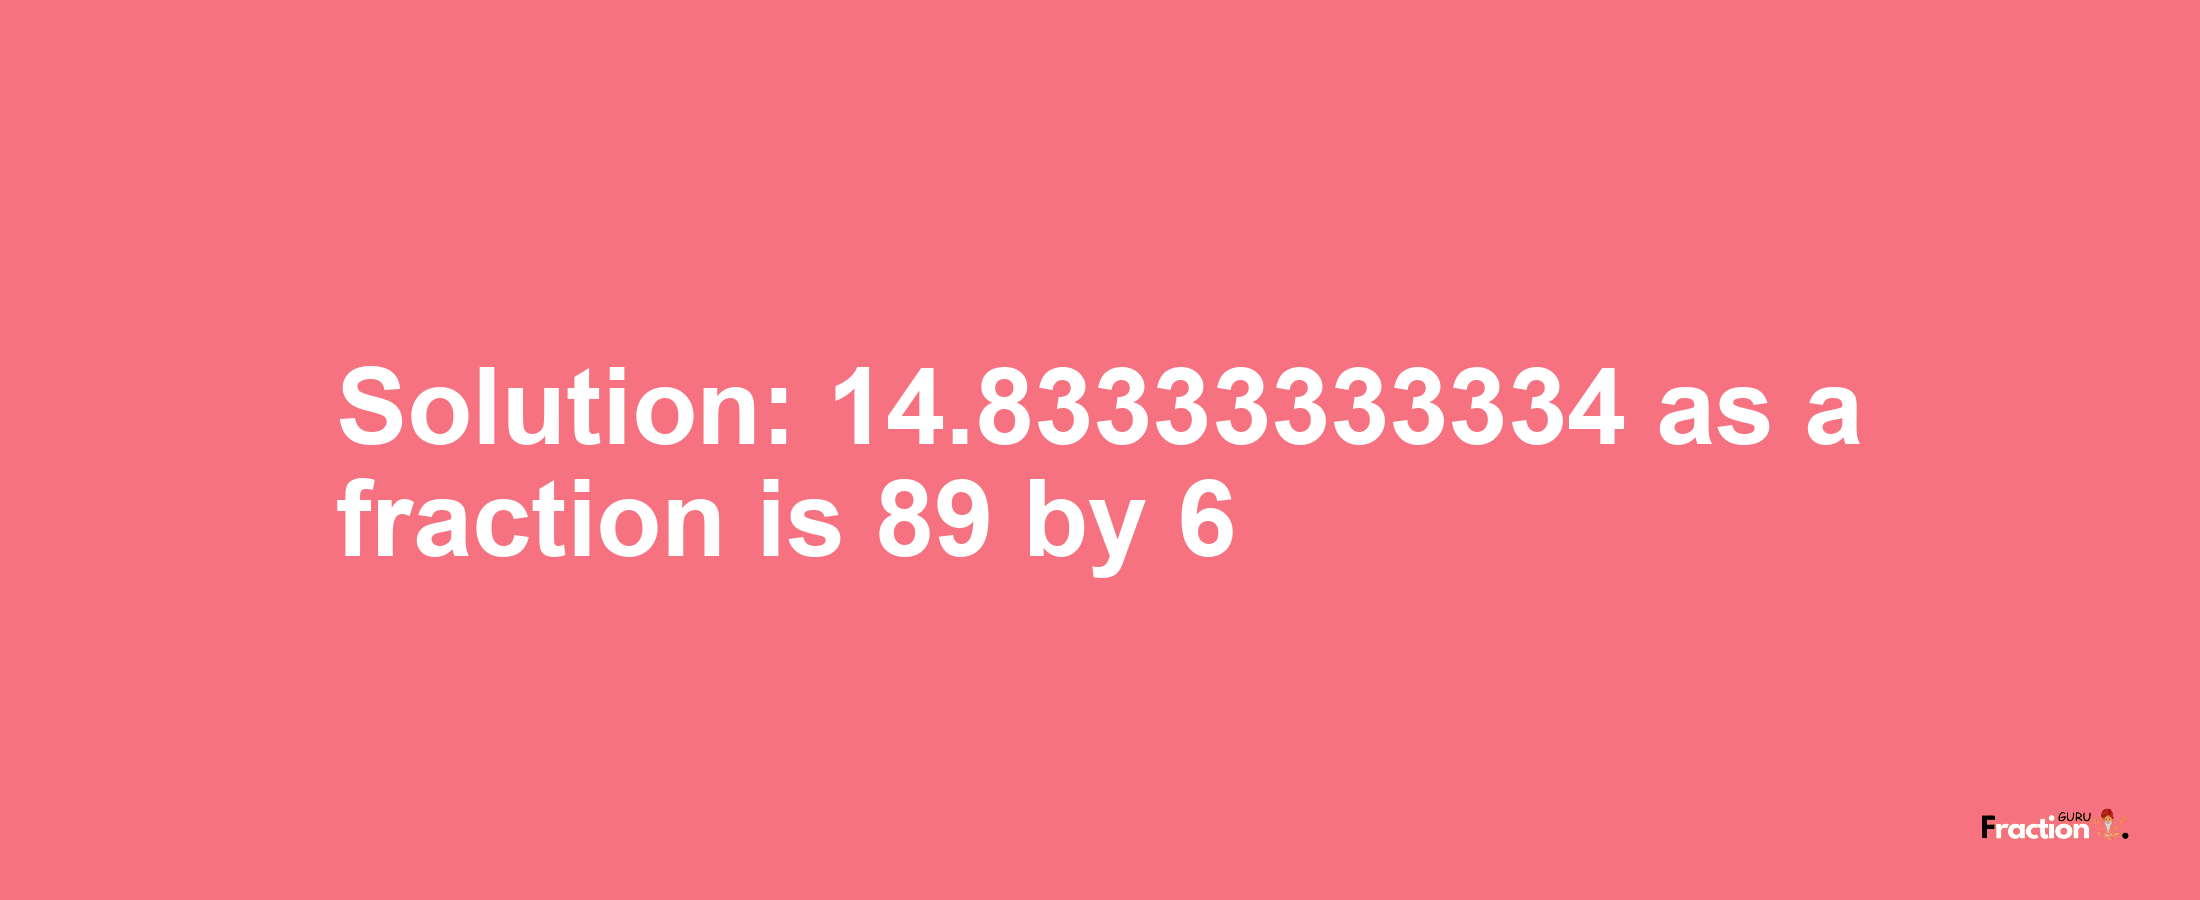 Solution:14.83333333334 as a fraction is 89/6